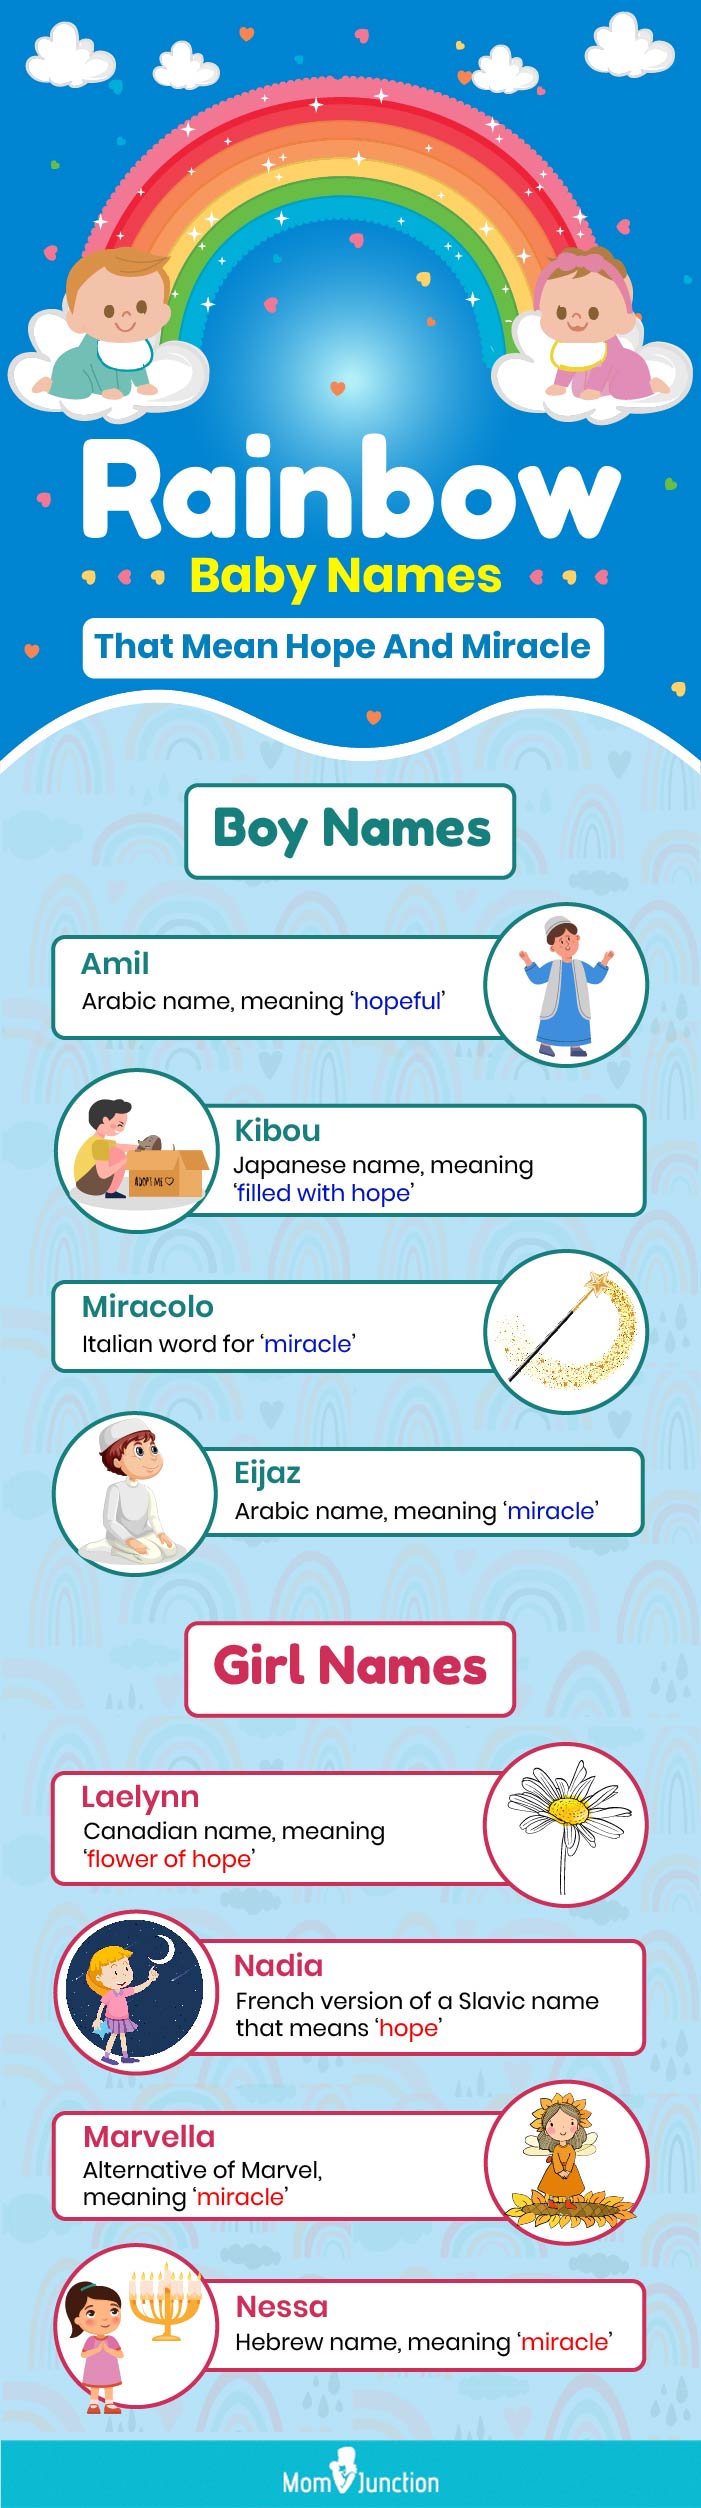 rainbow baby names that mean hope and miracle (infographic)